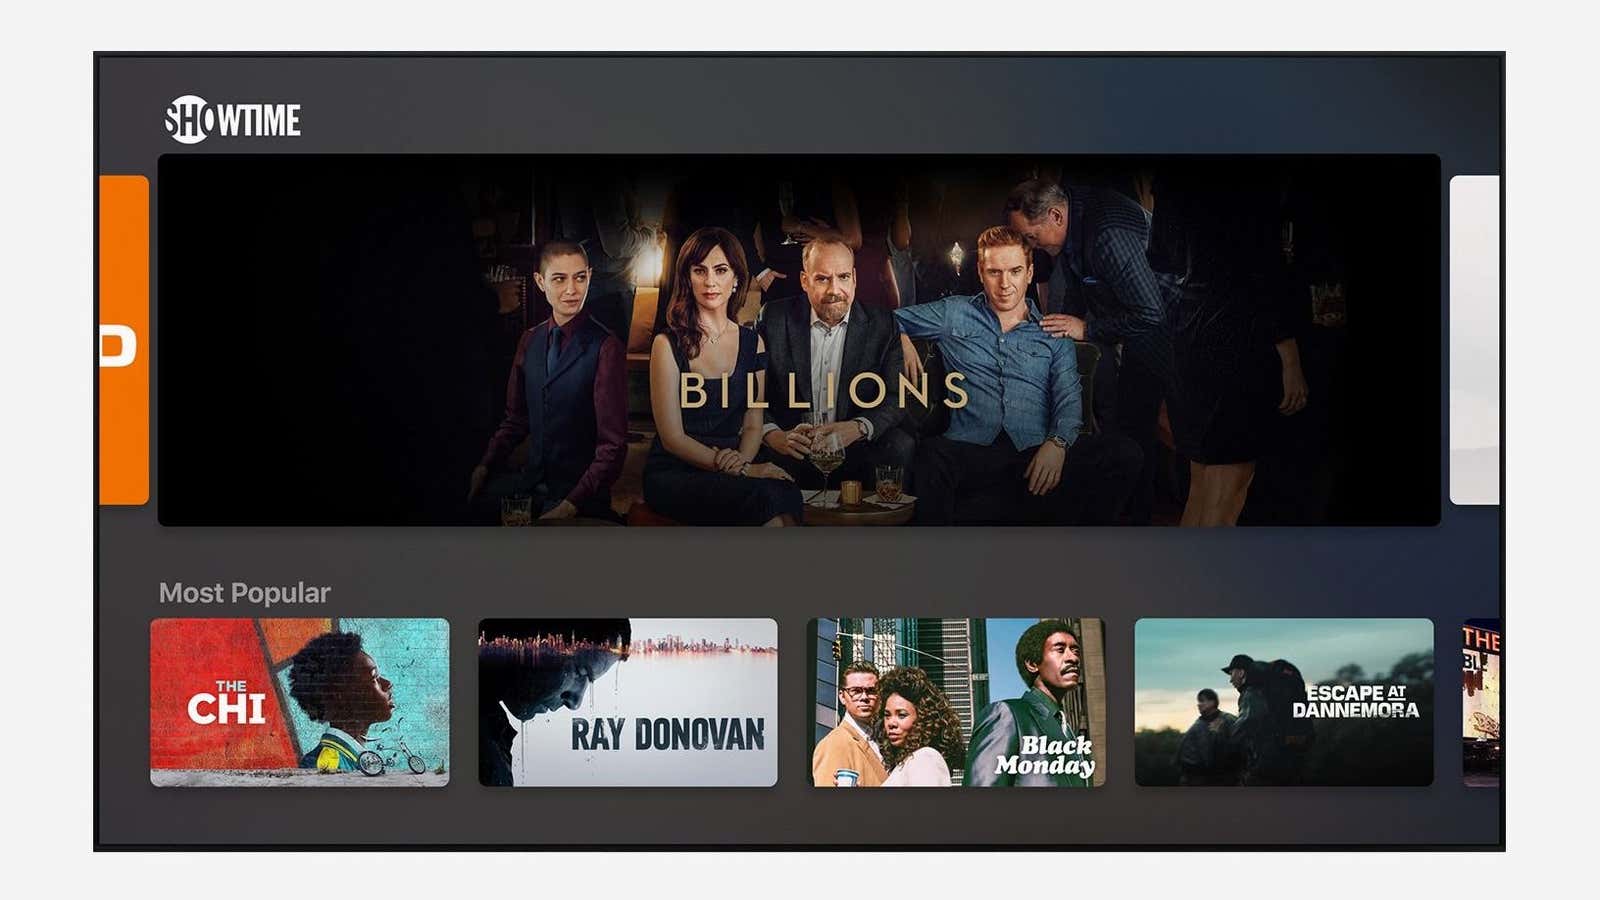 Apple’s updated TV app launches in May and hits other devices in the spring.